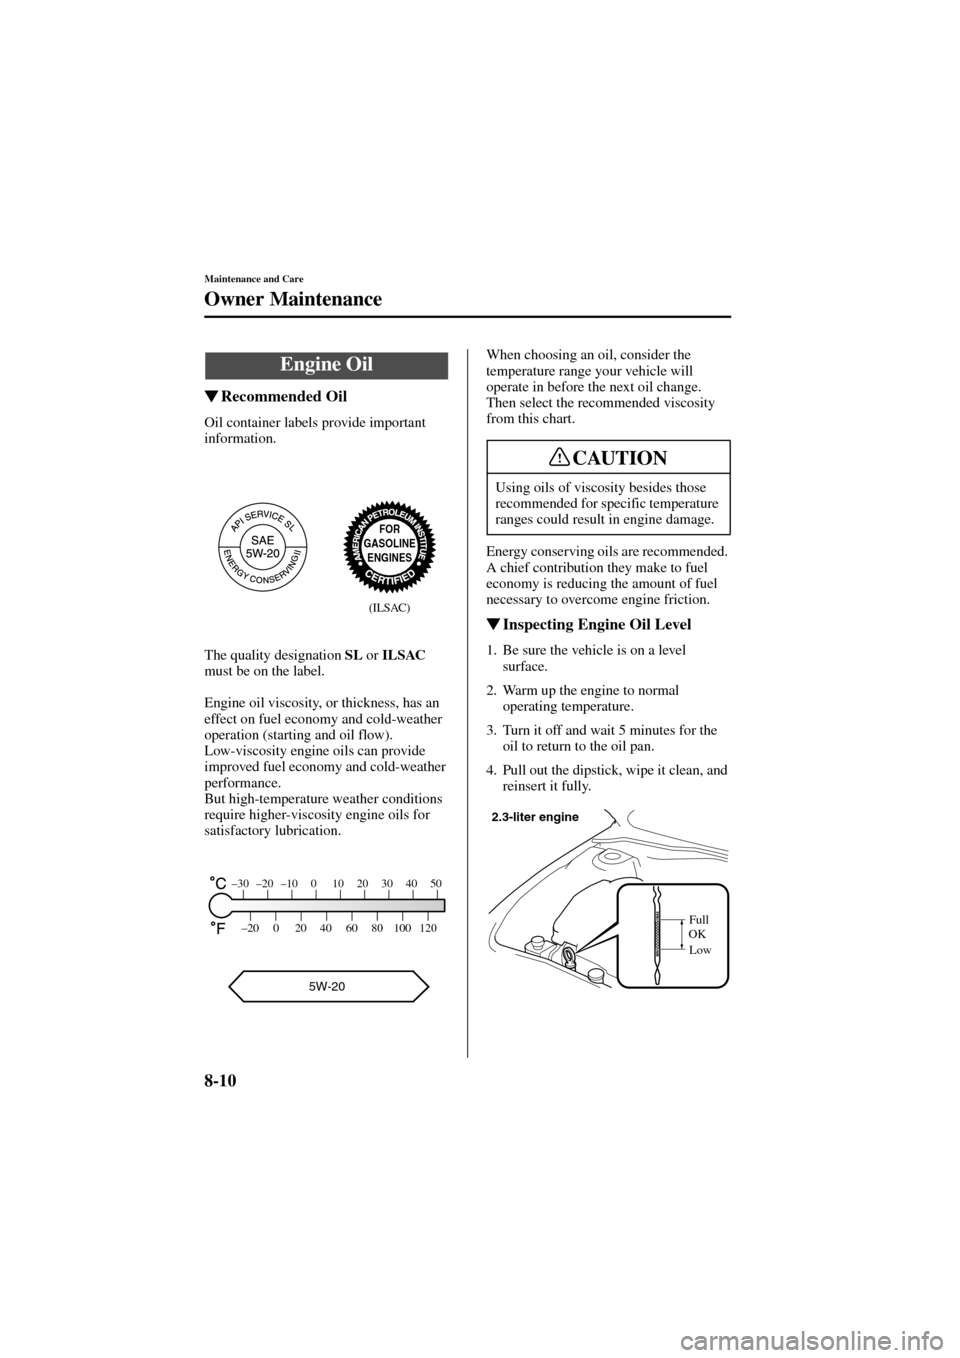 MAZDA MODEL 6 2004   (in English) Owners Manual 8-10
Maintenance and Care
Owner Maintenance
Form No. 8R29-EA-02I
Recommended Oil
Oil container labels provide important 
information.
The quality designation SL
 or ILSAC
 
must be on the label.
Engi